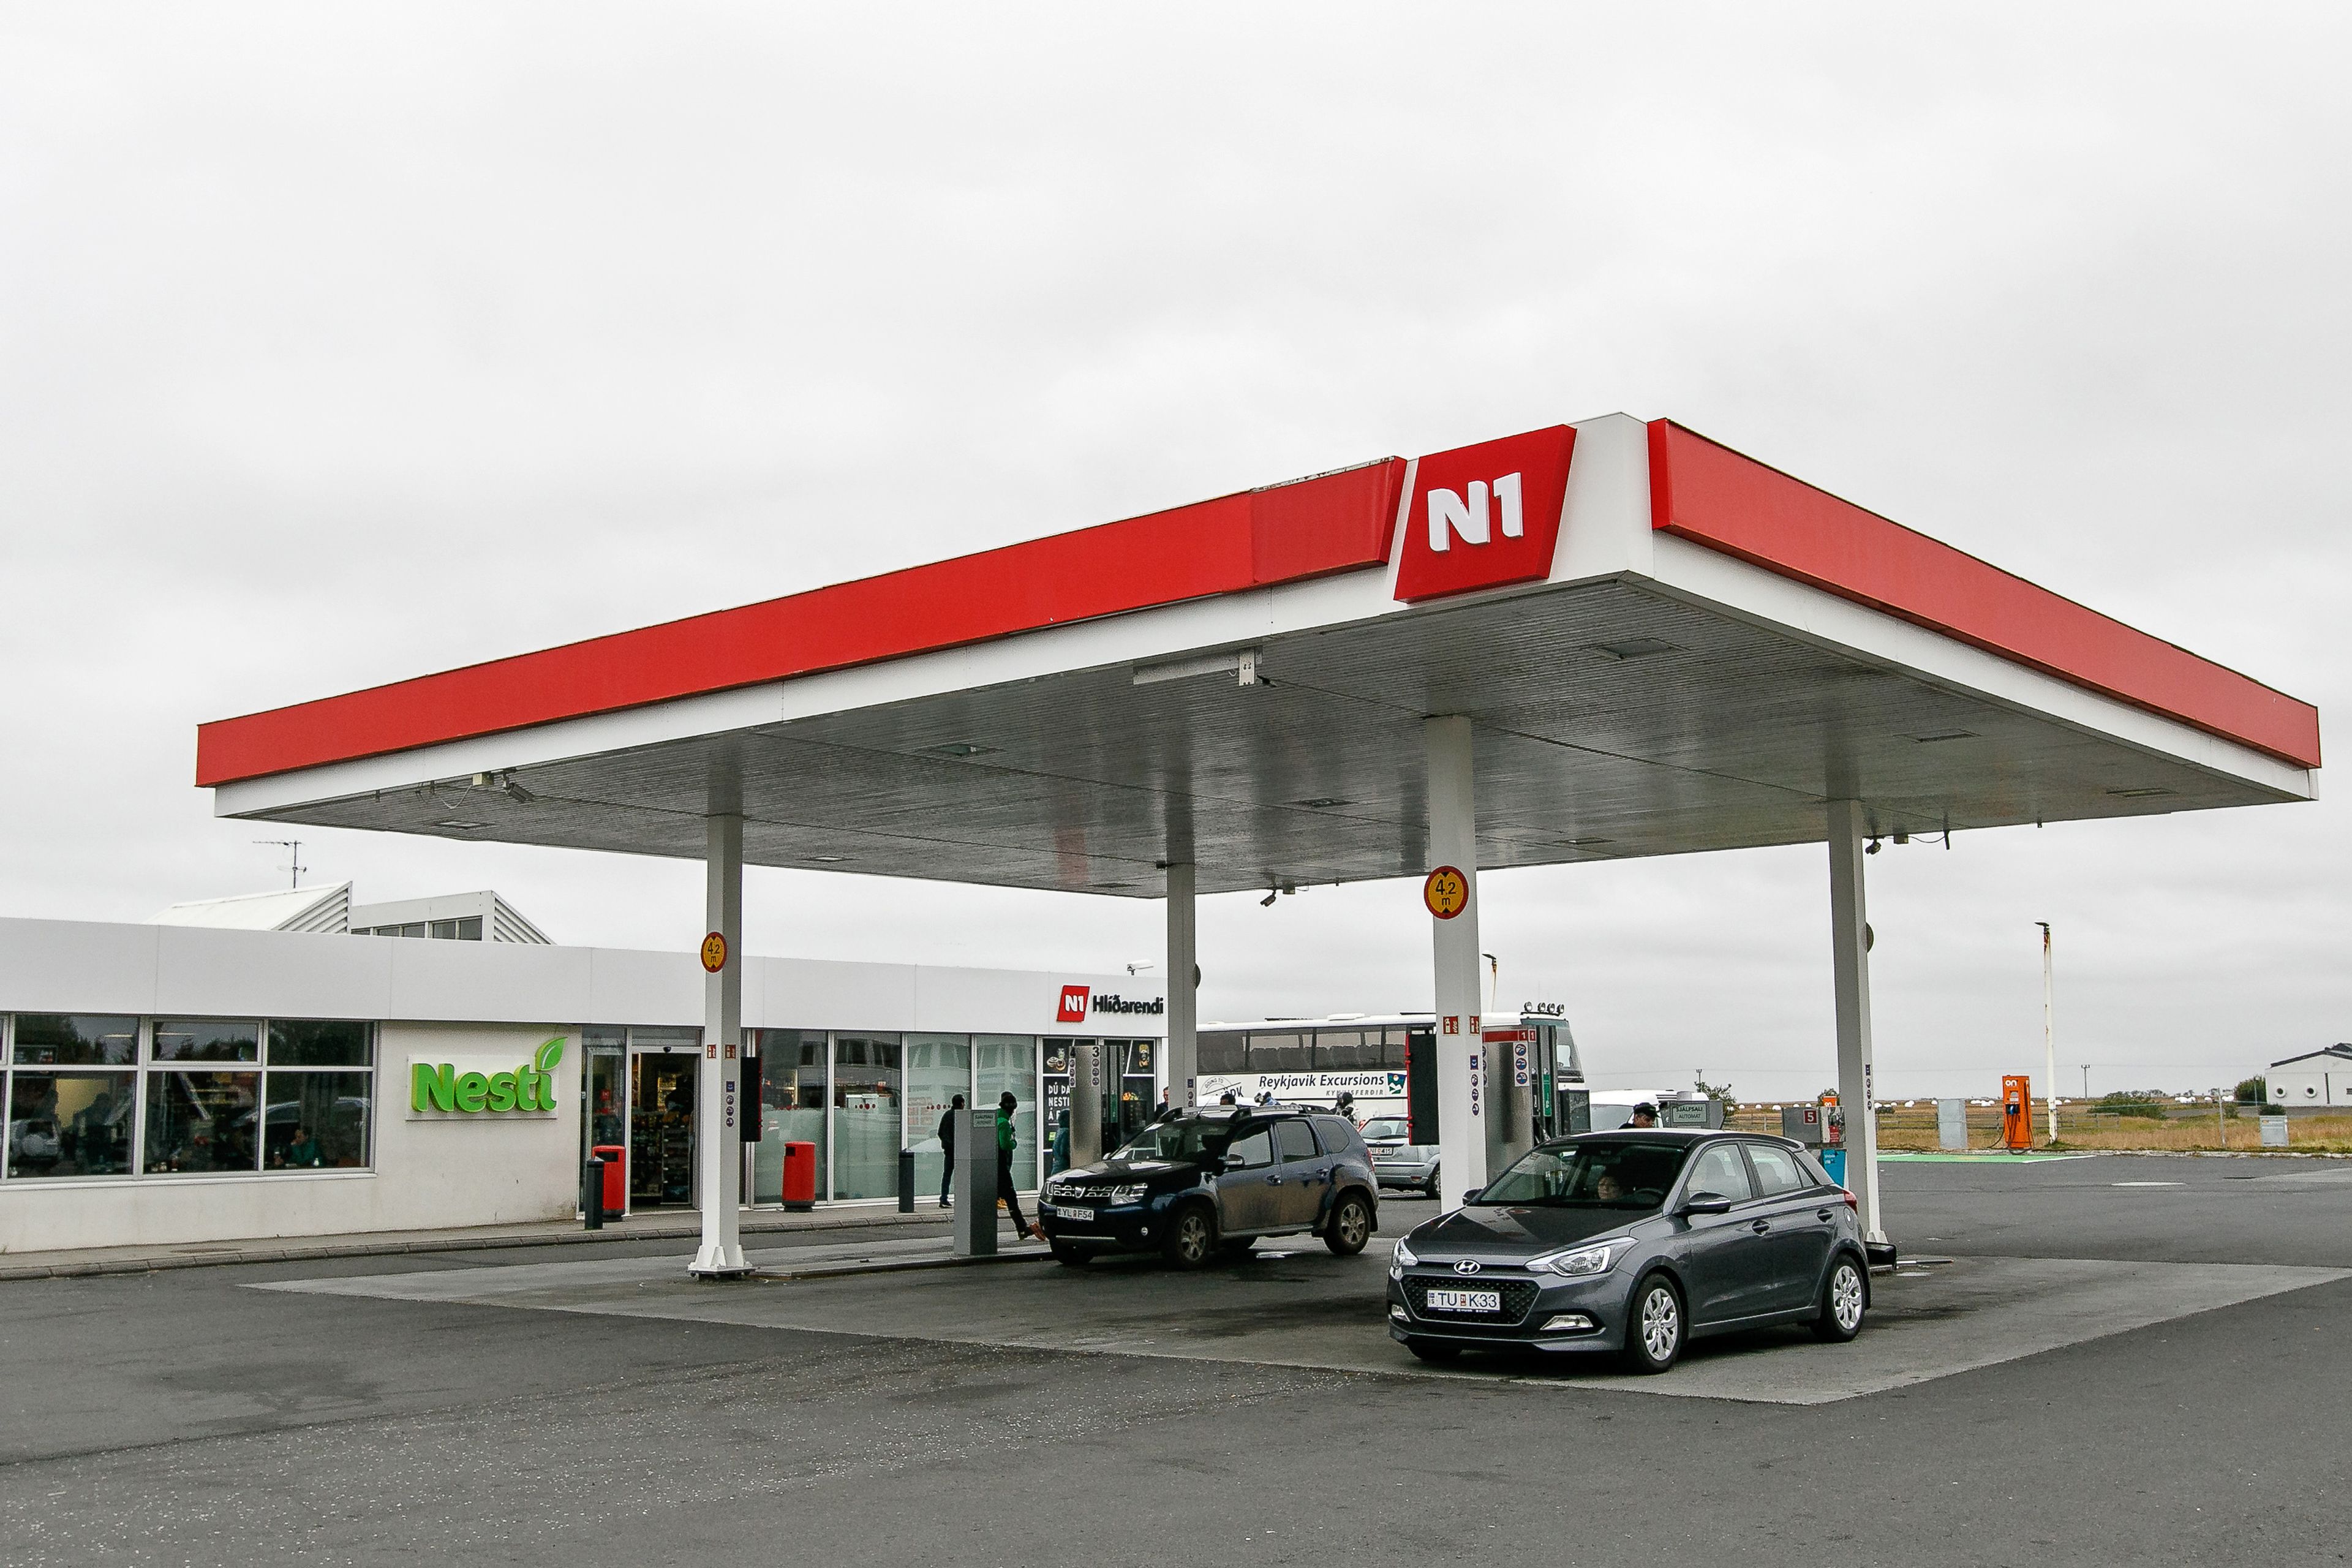 N1 gas station in Iceland